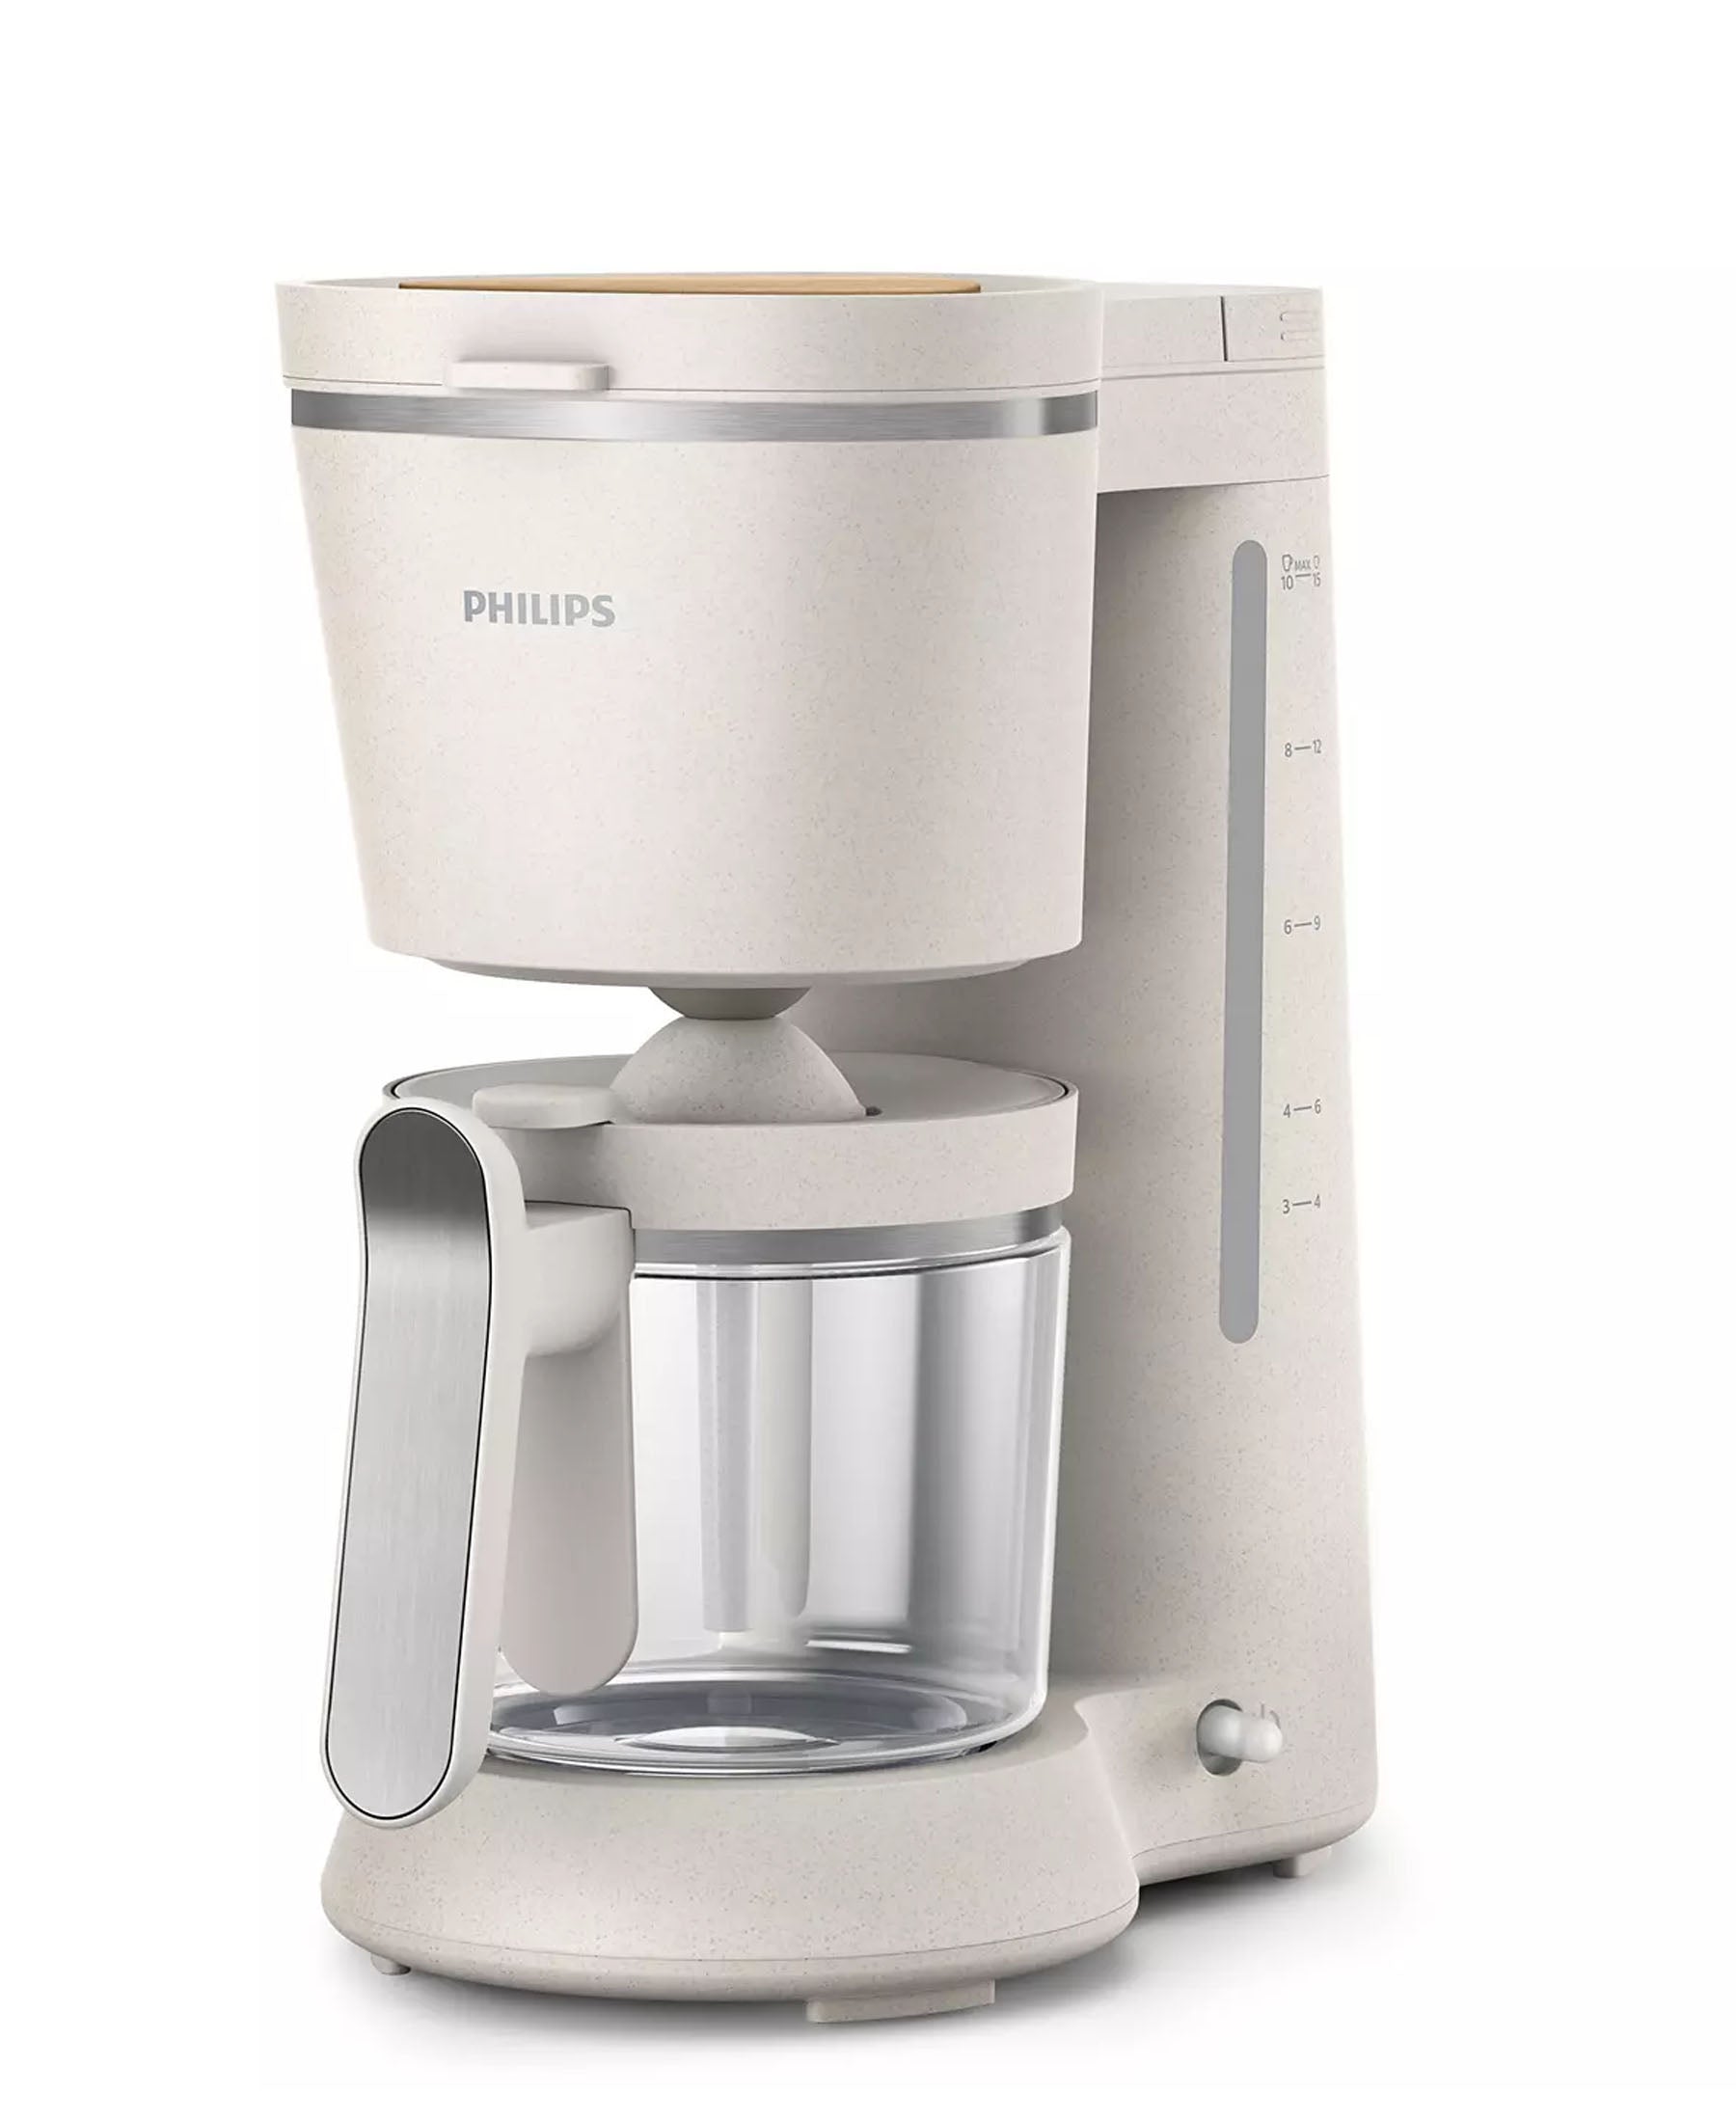 Philips Eco Conscious Edition 5000 Series Coffee Maker - White